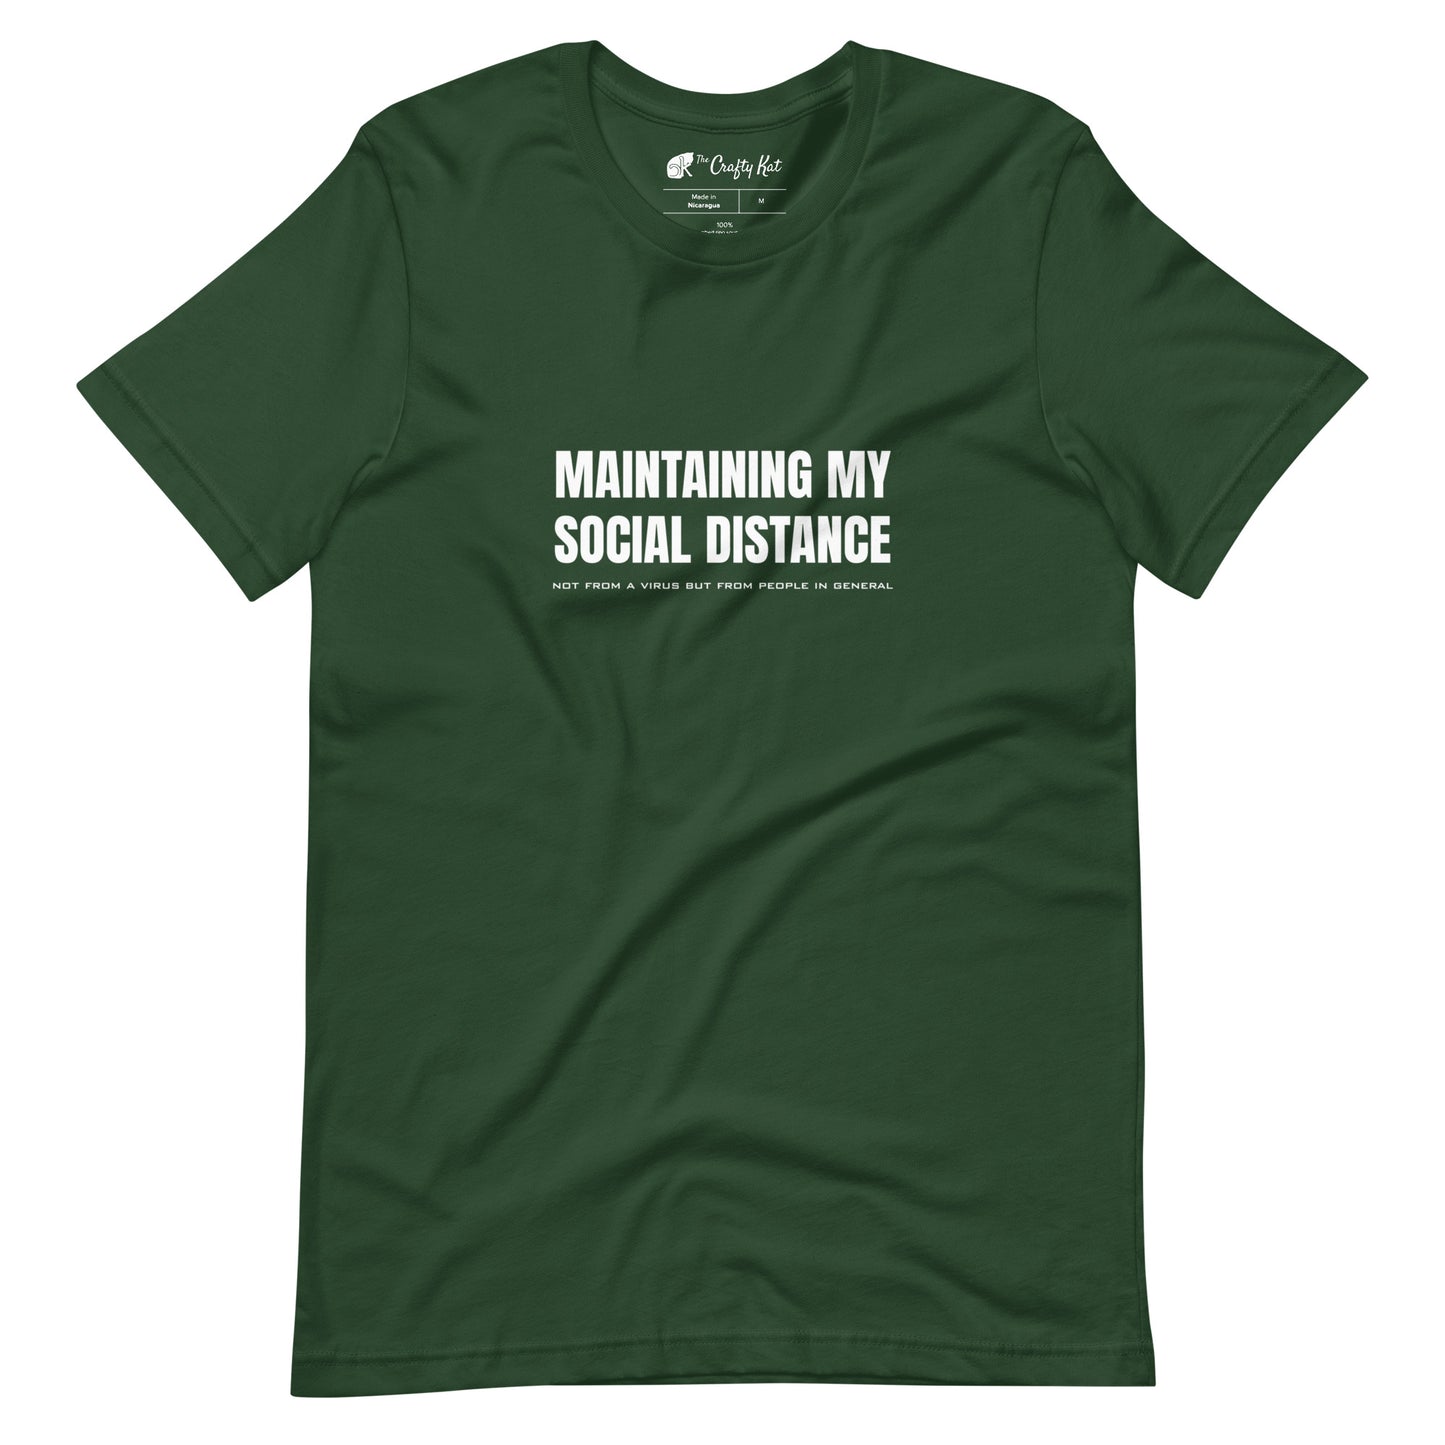 Forest green t-shirt with white graphic: "MAINTAINING MY SOCIAL DISTANCE not from a virus but from people in general"